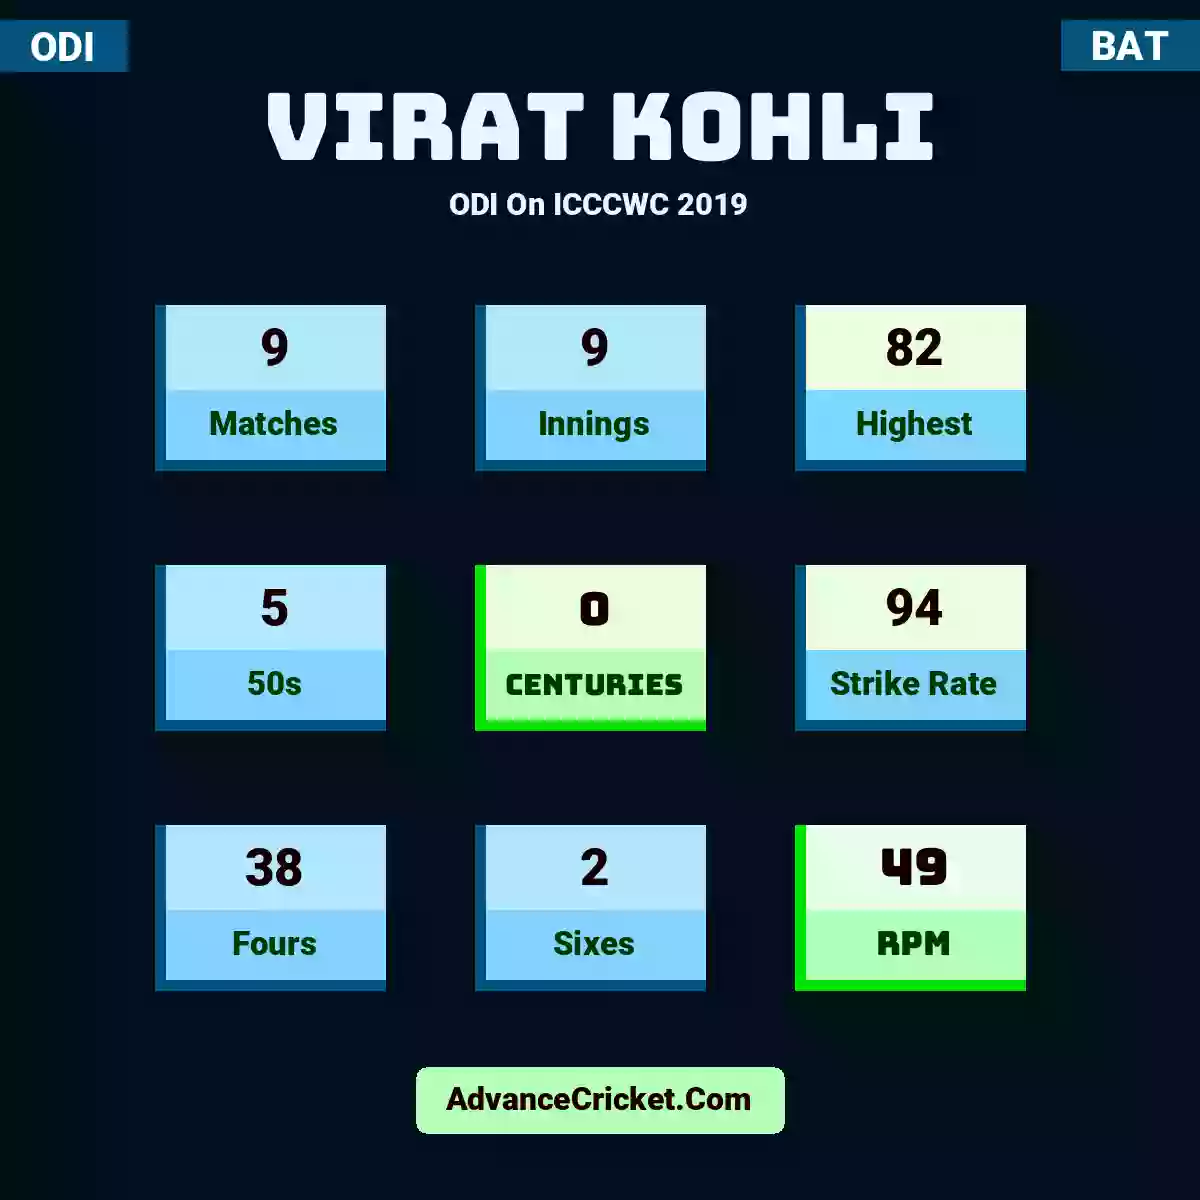 Virat Kohli ODI  On ICCCWC 2019, Virat Kohli played 9 matches, scored 82 runs as highest, 5 half-centuries, and 0 centuries, with a strike rate of 94. V.Kohli hit 38 fours and 2 sixes, with an RPM of 49.